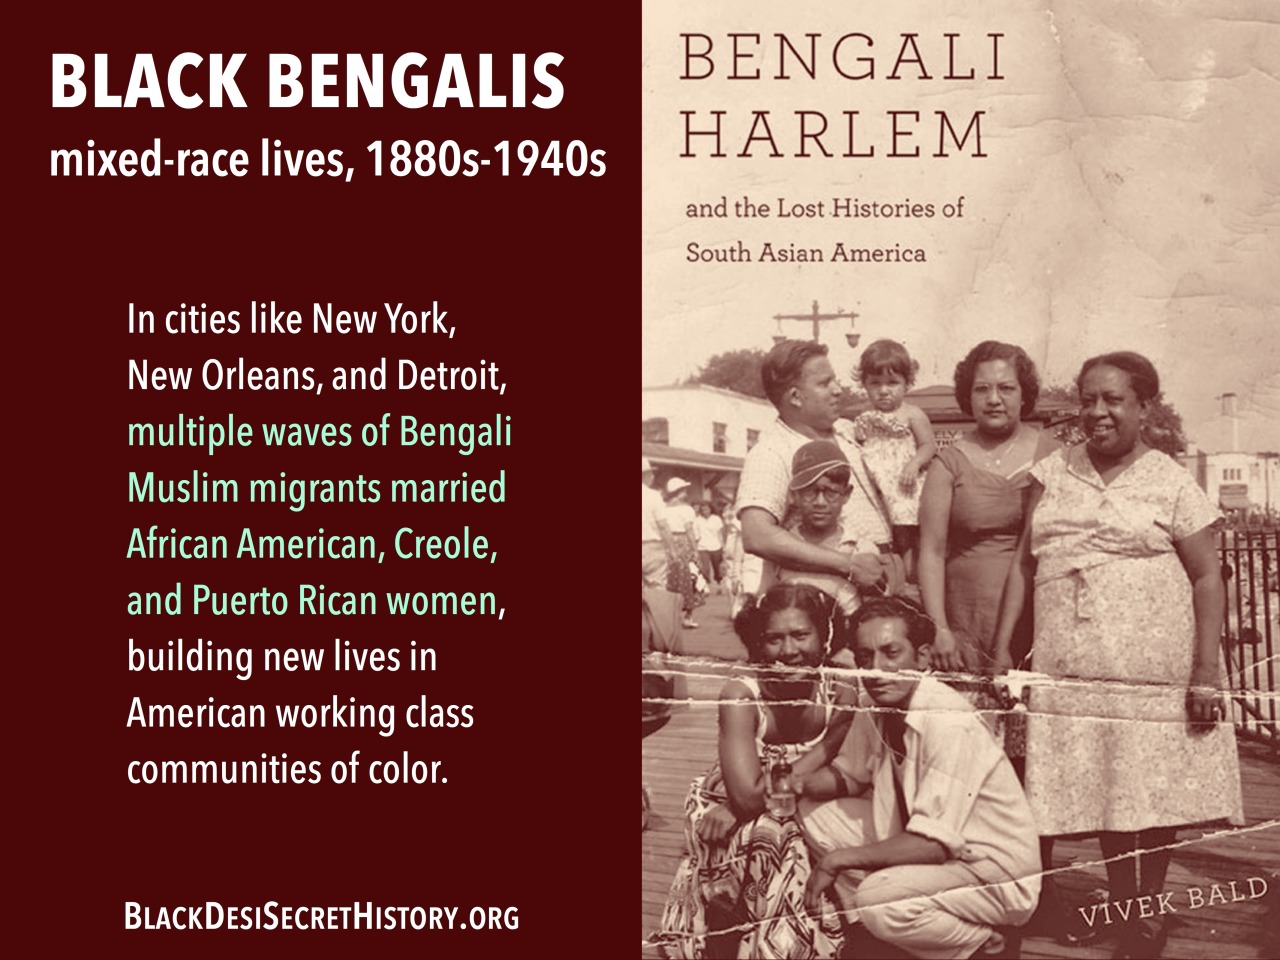 BLACK BENGALIS, mixed-race lives, 1880s-1940s: In cities like New York, New Orleans, and Detroit, multiple waves of Bengali Muslim migrants married African American, Creole, and Puerto Rican women, building new lives in American working class communities of color.